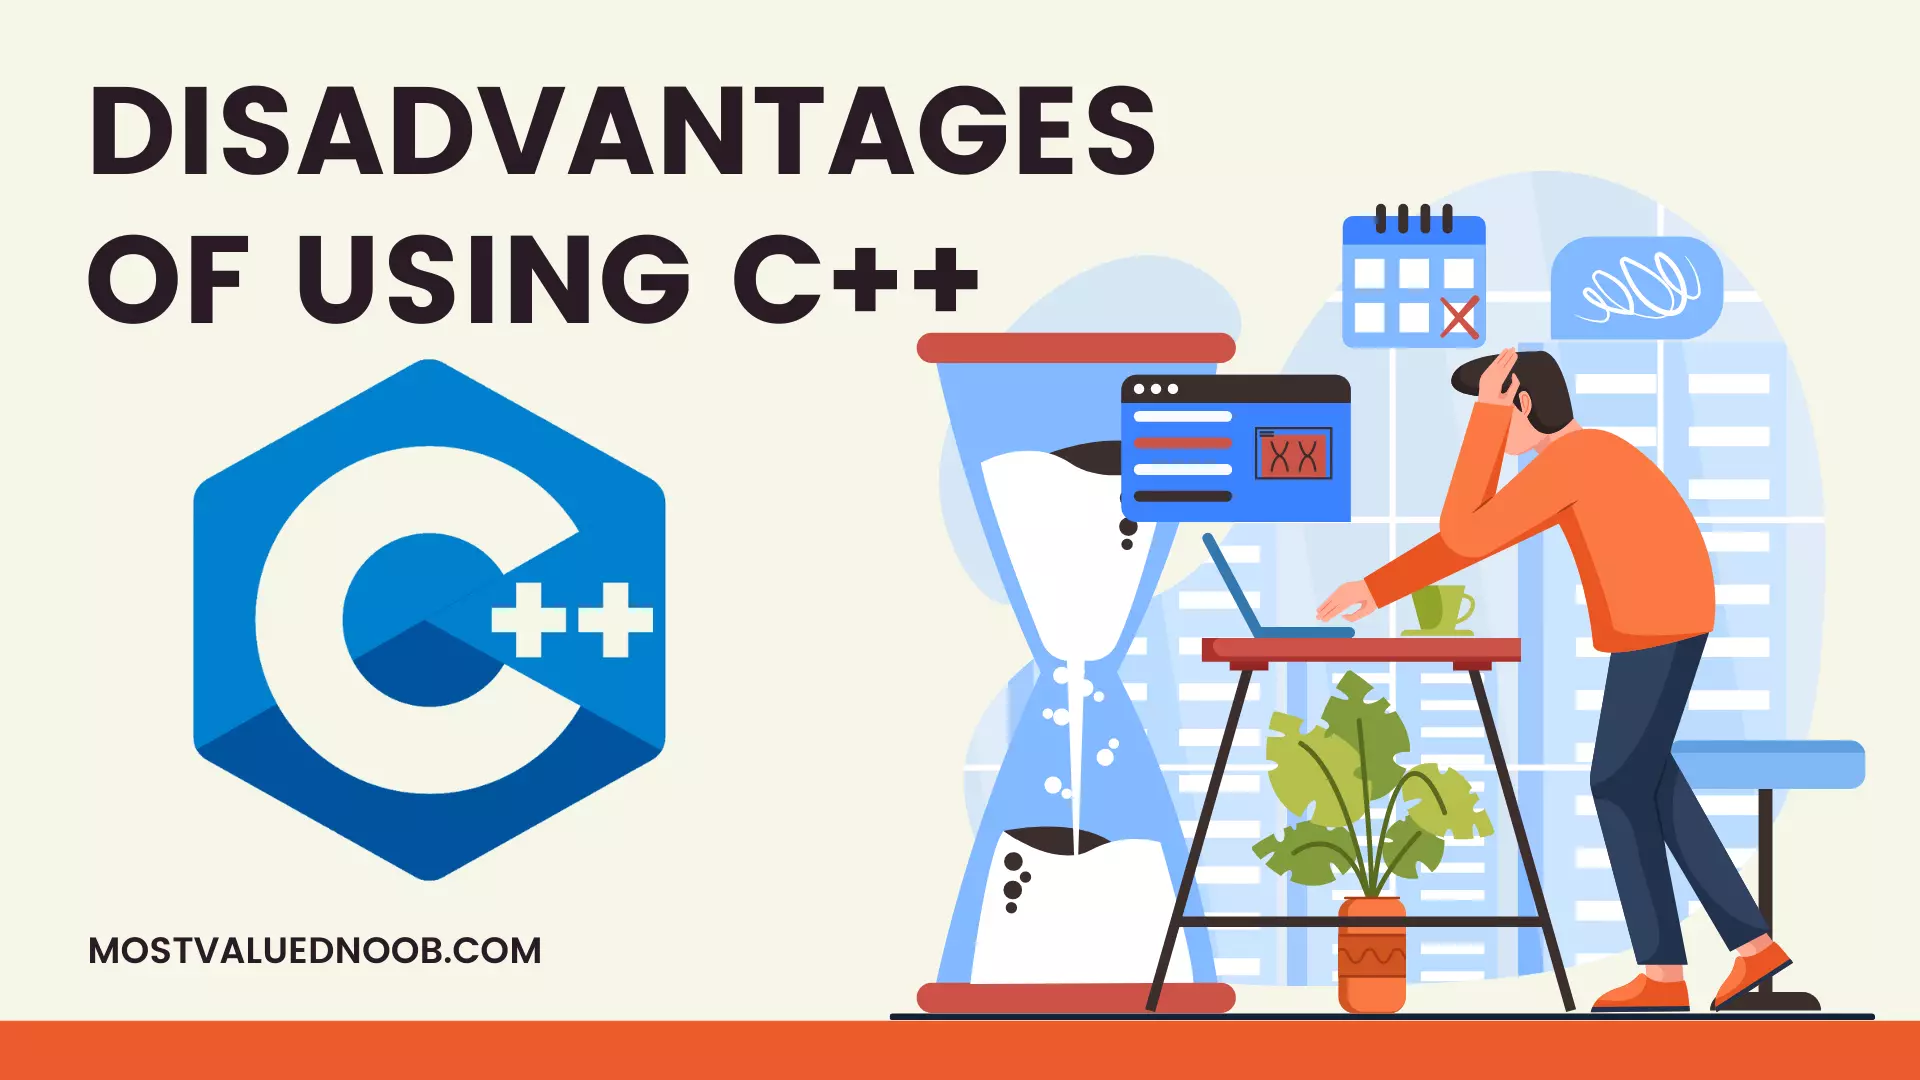 Disadvantages of using C++